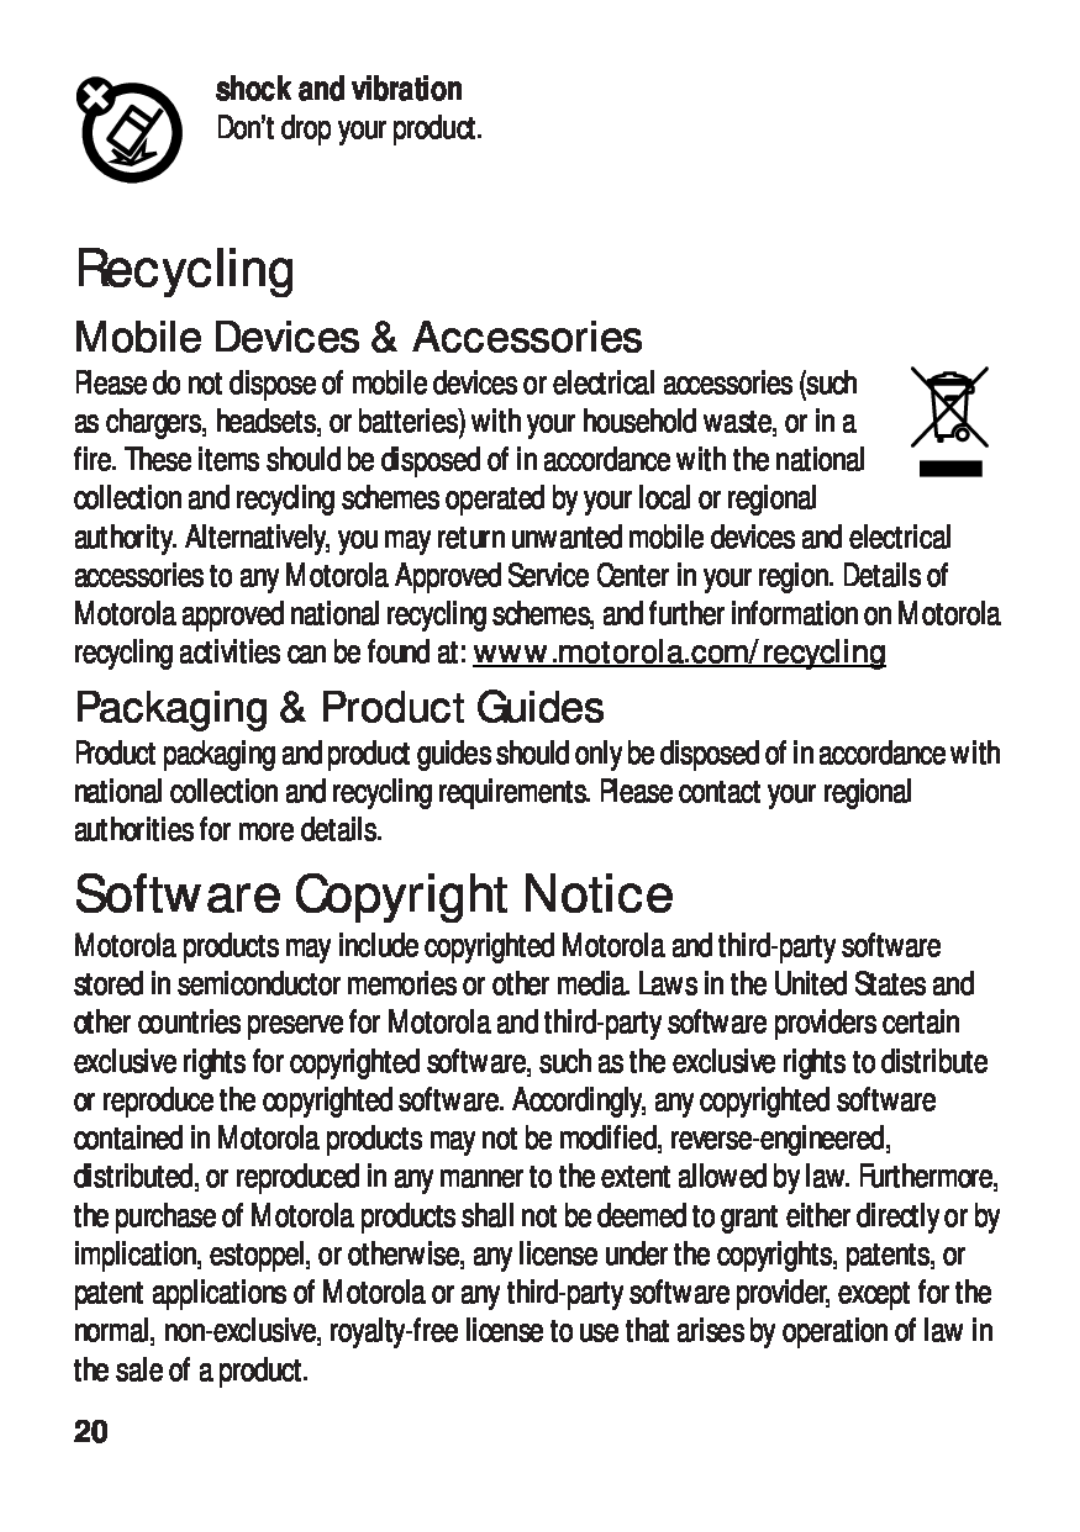 Motorola TX500 manual Recycling, Software Copyright Notice, Mobile Devices & Accessories, Packaging & Product Guides 